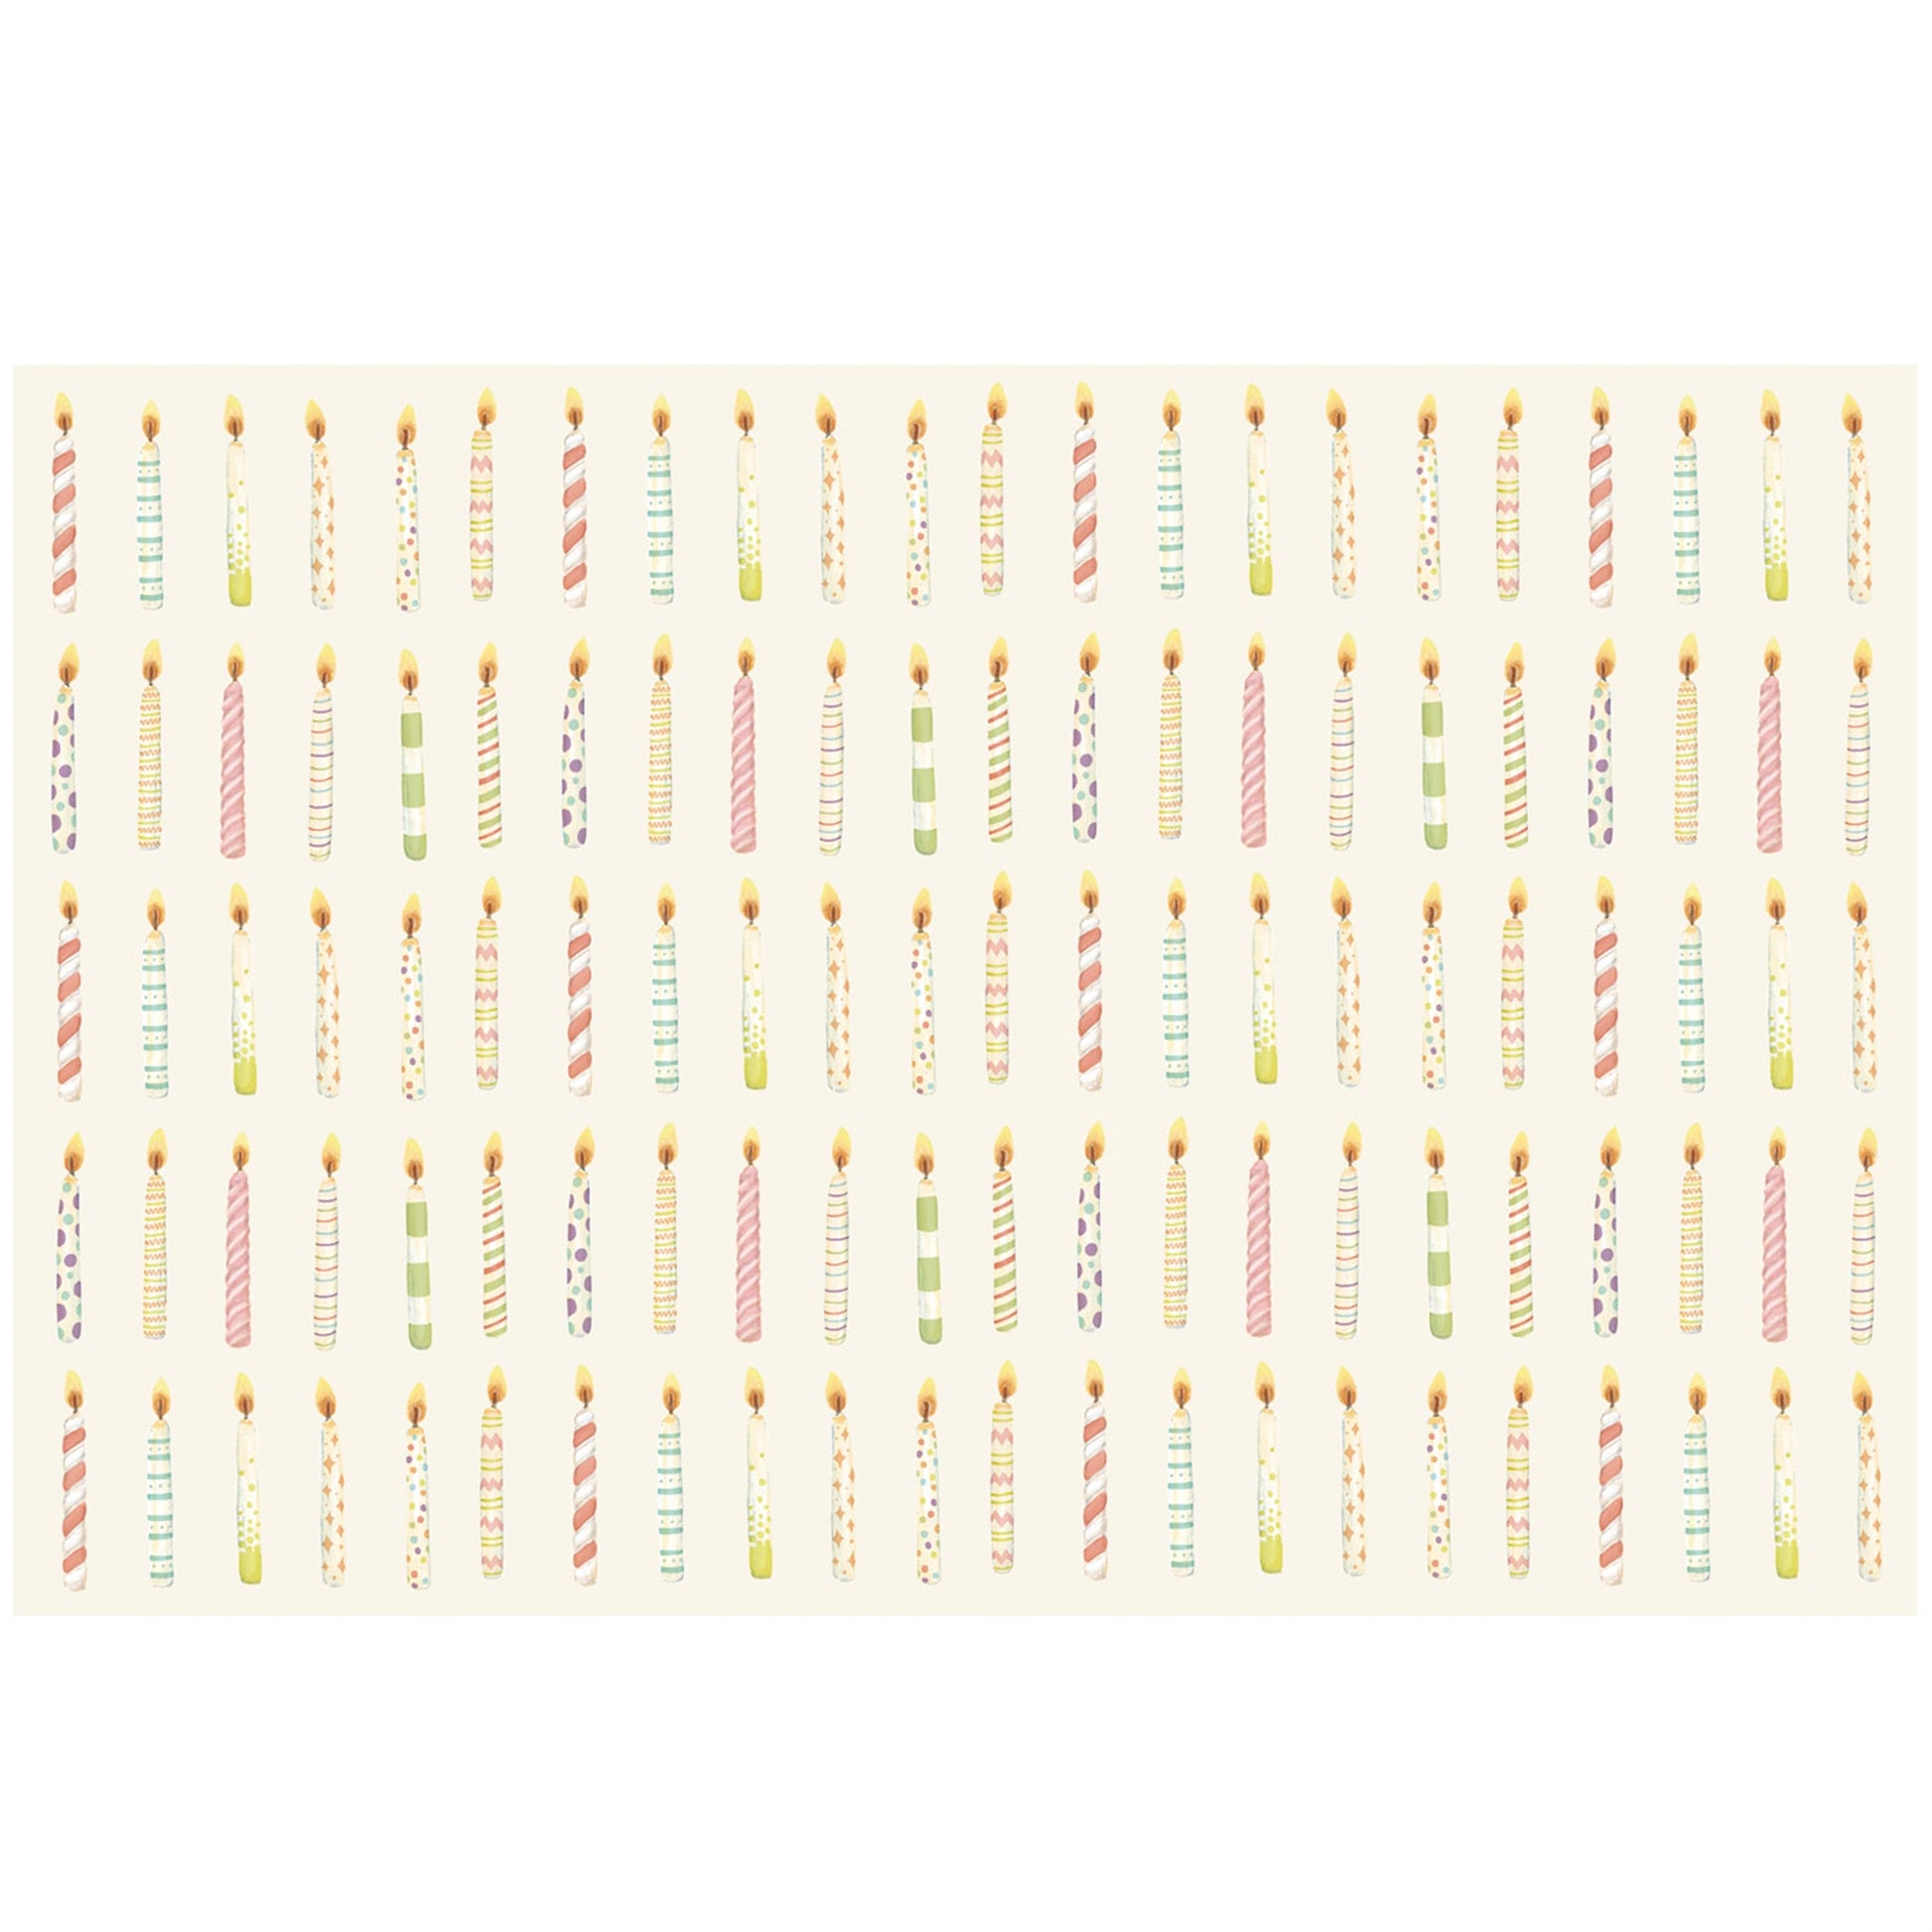 The oh so cute birthday candle placemats